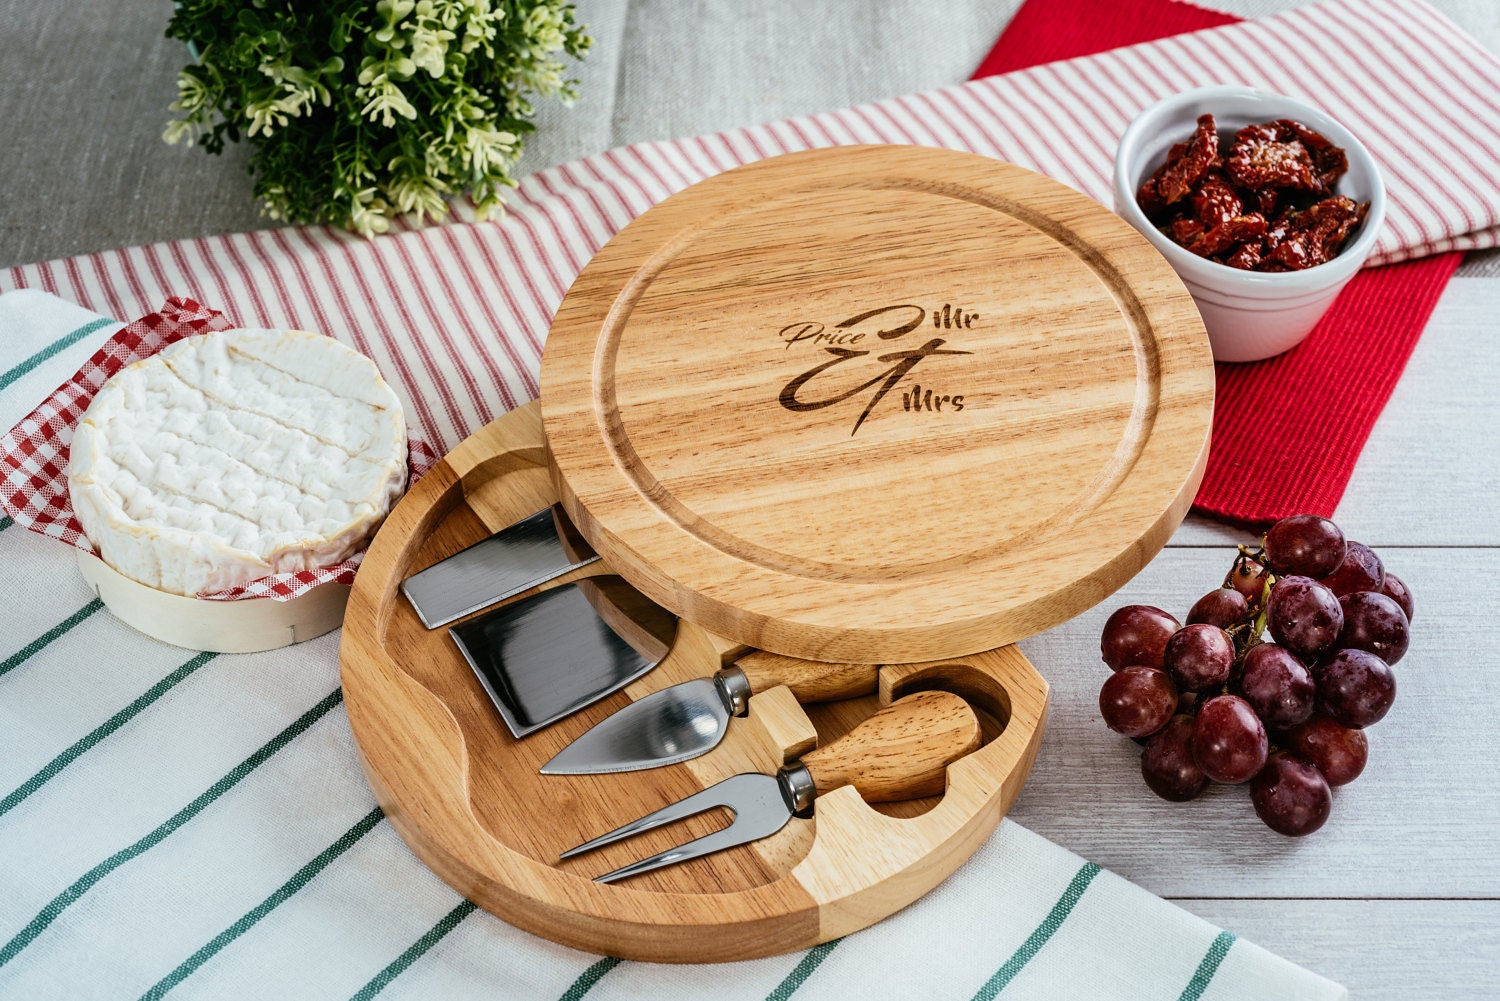 Personalised round wooden cheese board set - Name - Est. - wedding gift